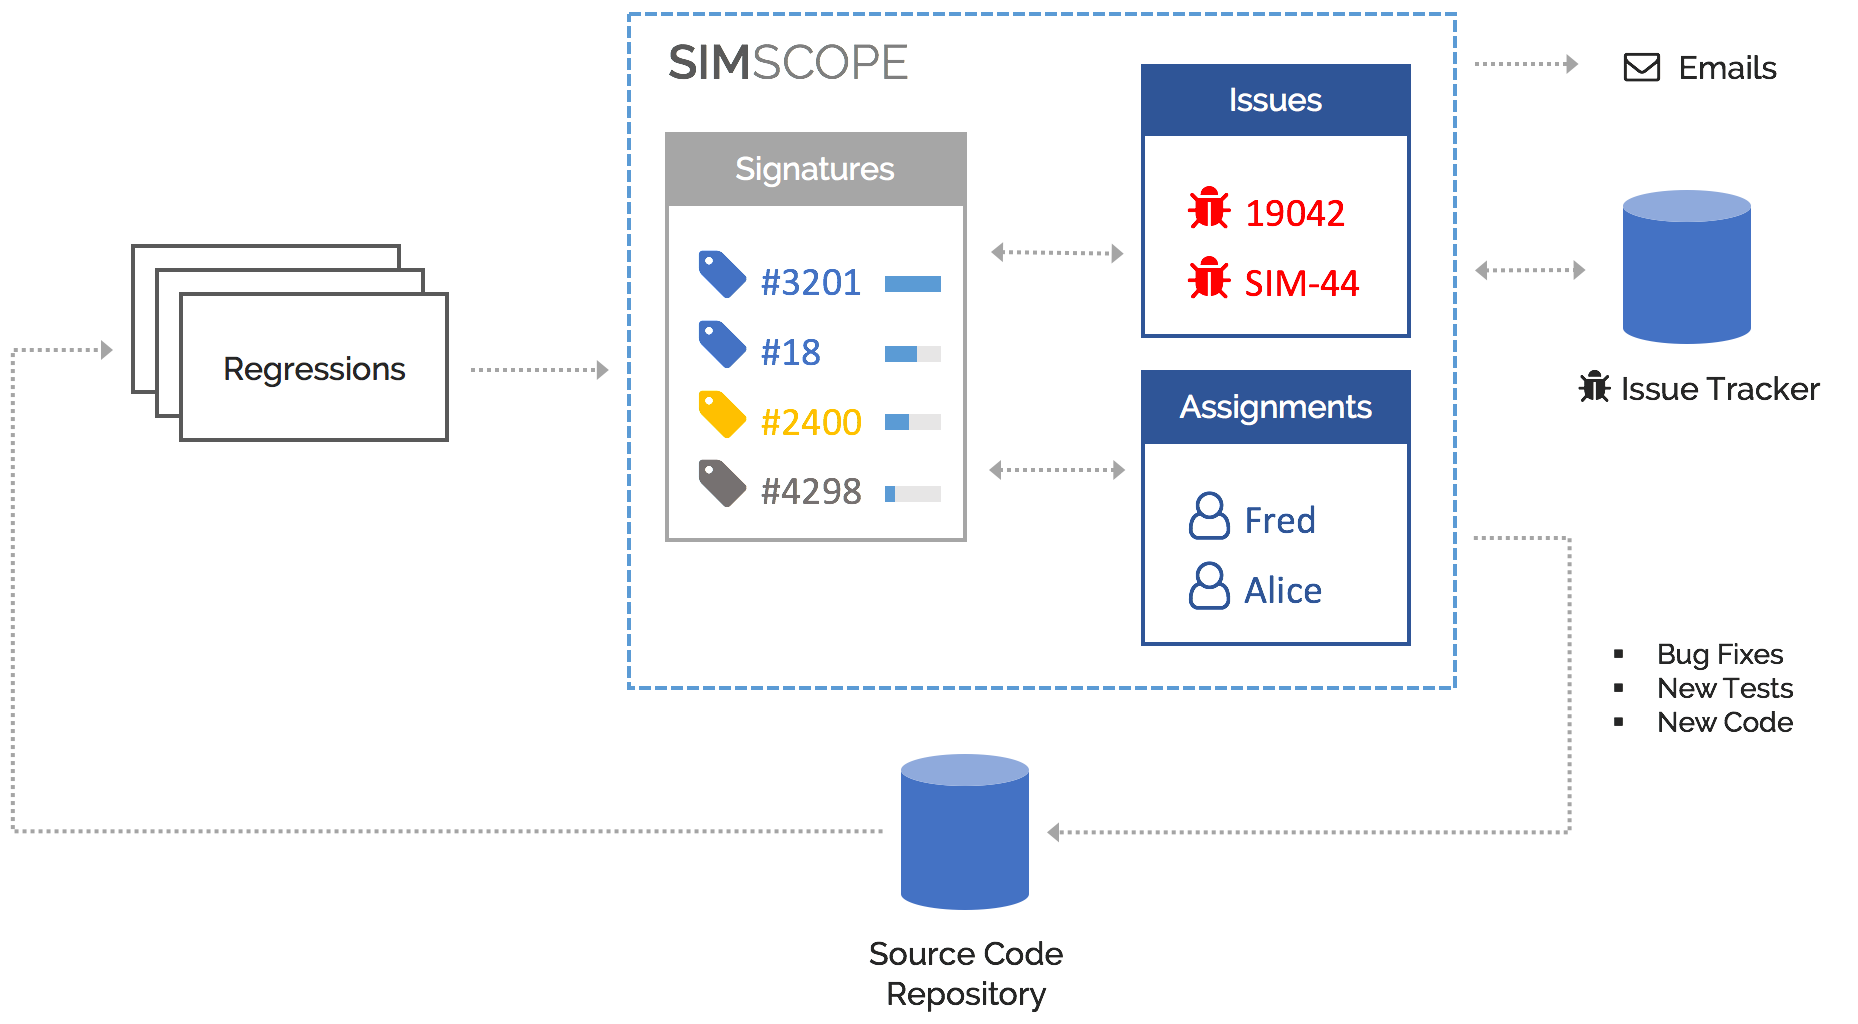 Simscope Workflow